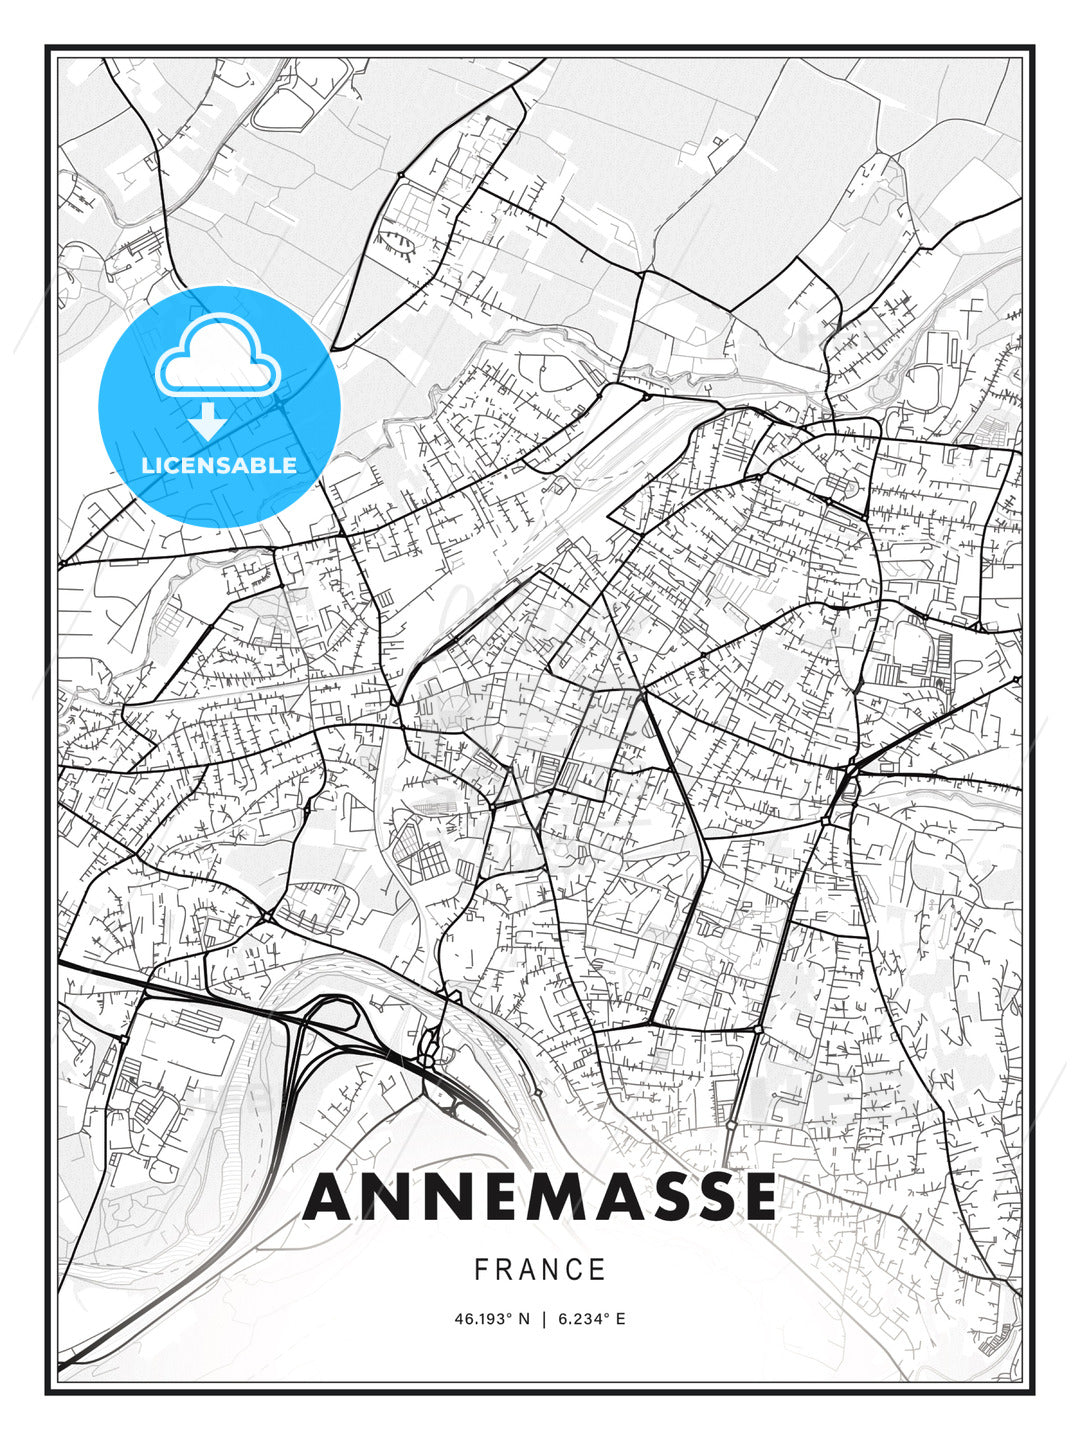 Annemasse, France, Modern Print Template in Various Formats - HEBSTREITS Sketches